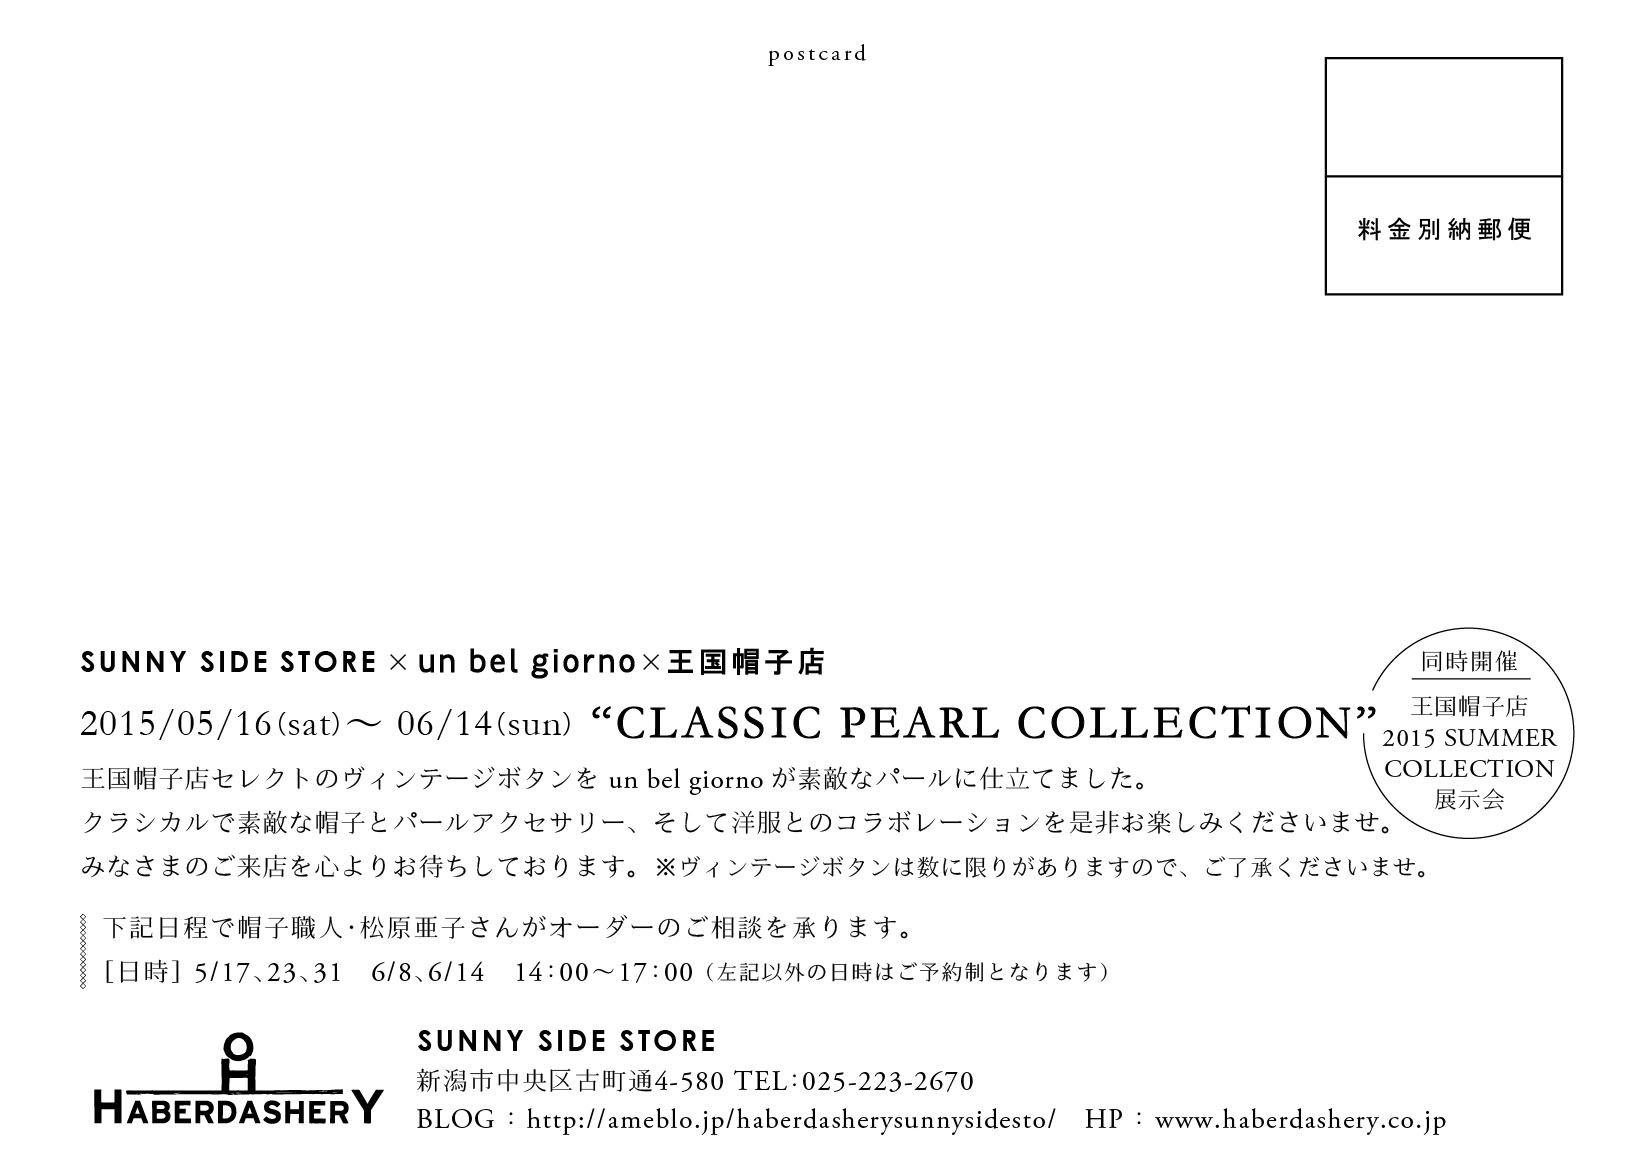 ClassicPearlCollection_2.jpg